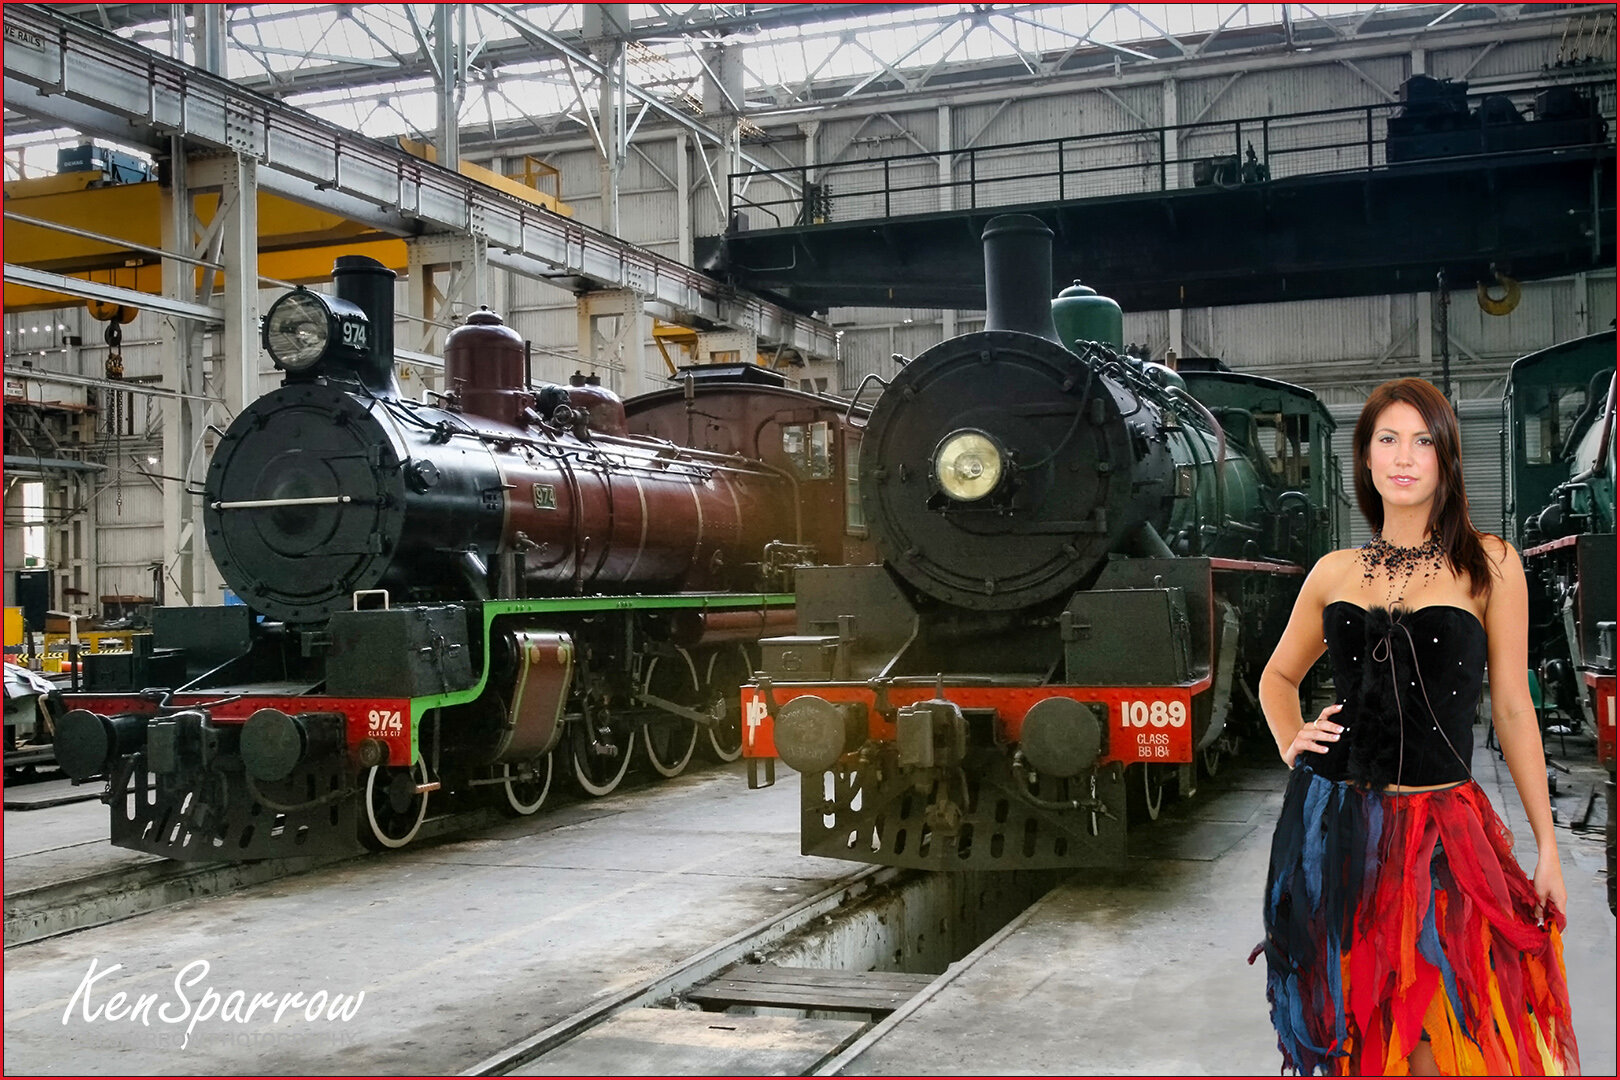 284  Amanda with the "Brown Bomber" at Ipswich Museum